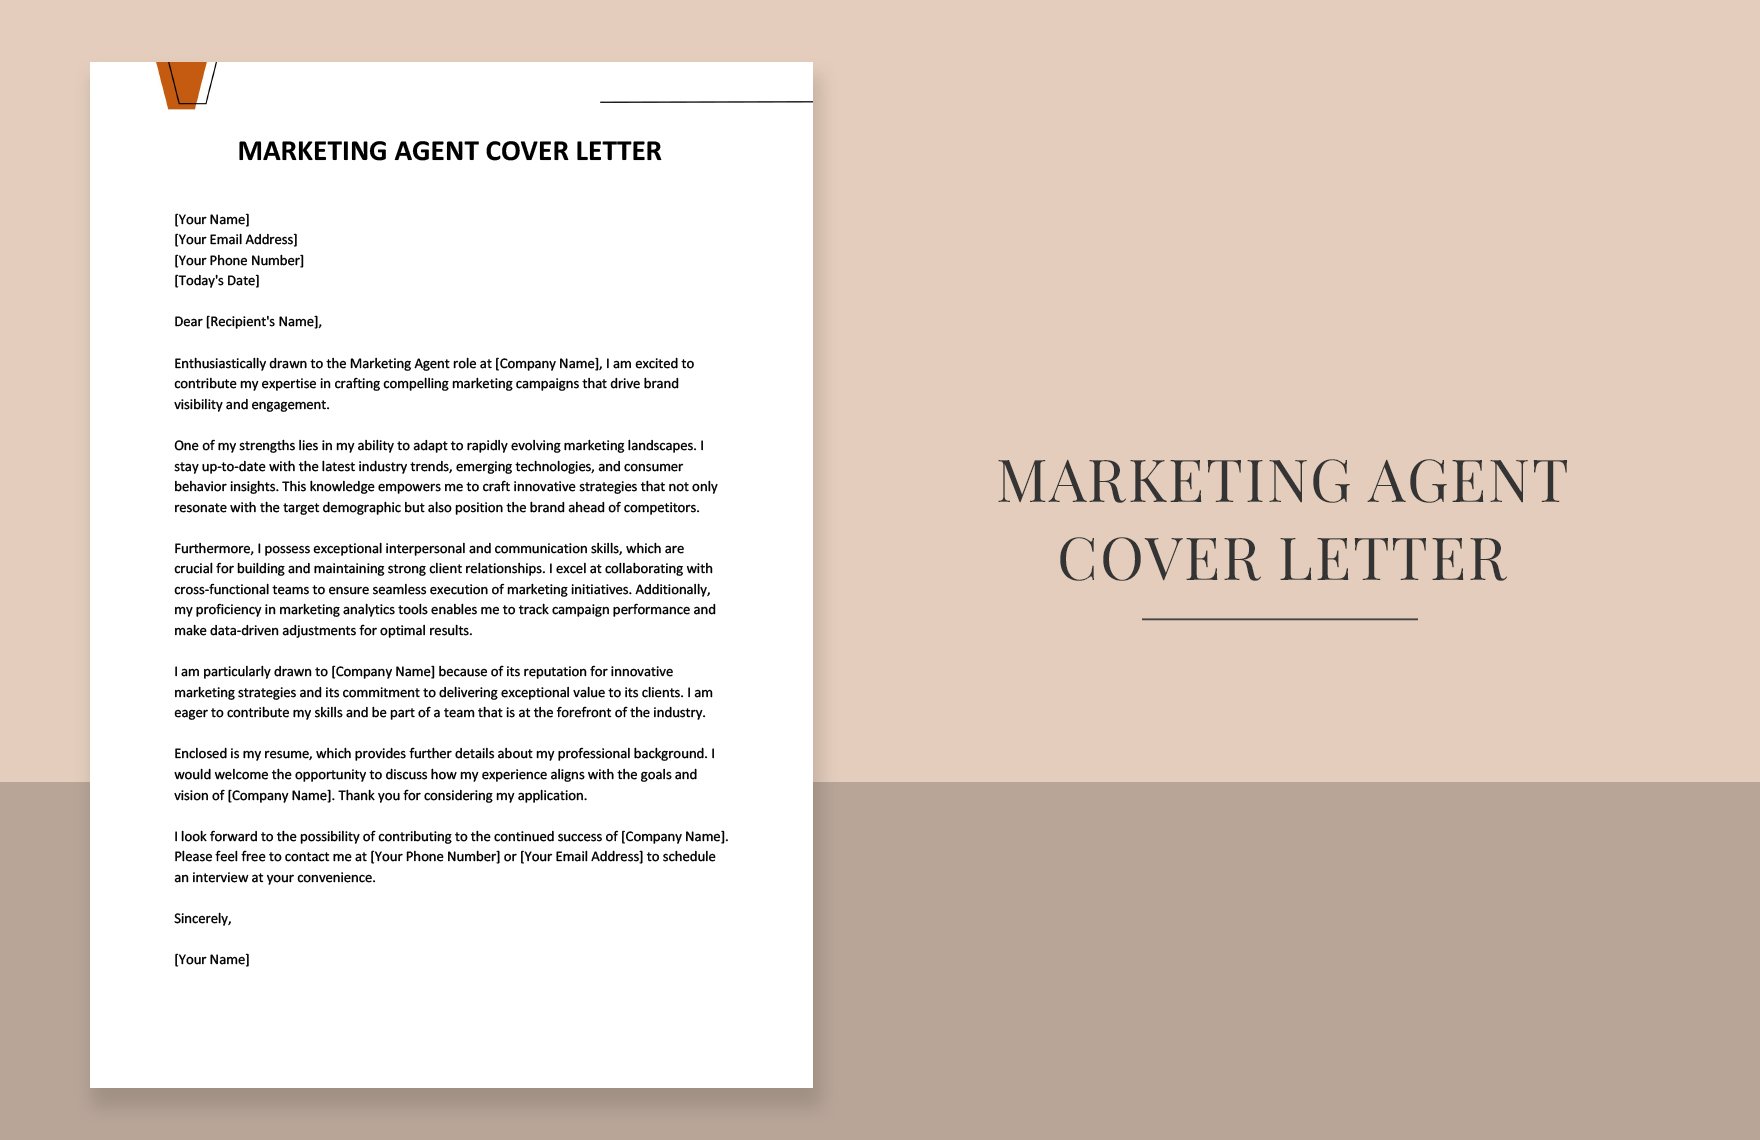 Marketing Agent Cover Letter